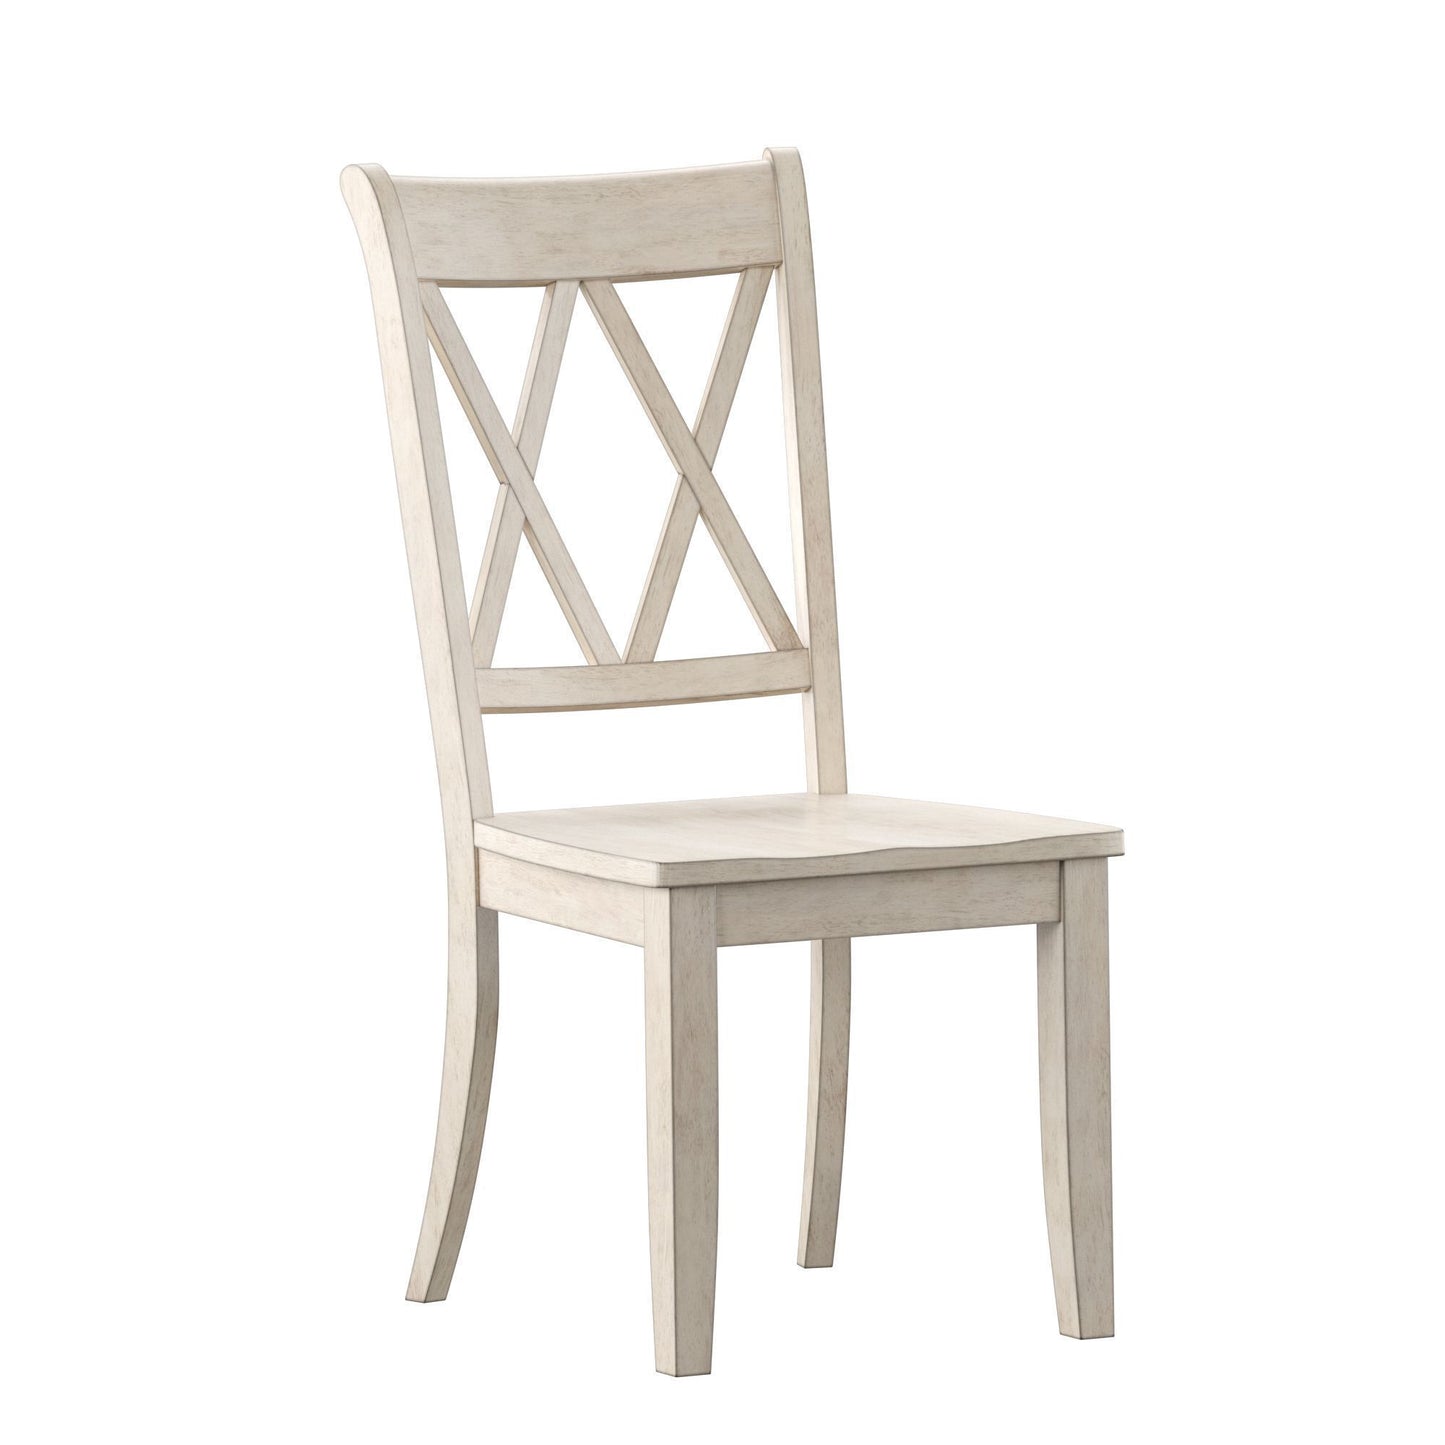 Double X Back Wood Dining Chairs (Set of 2) - Antique White Finish